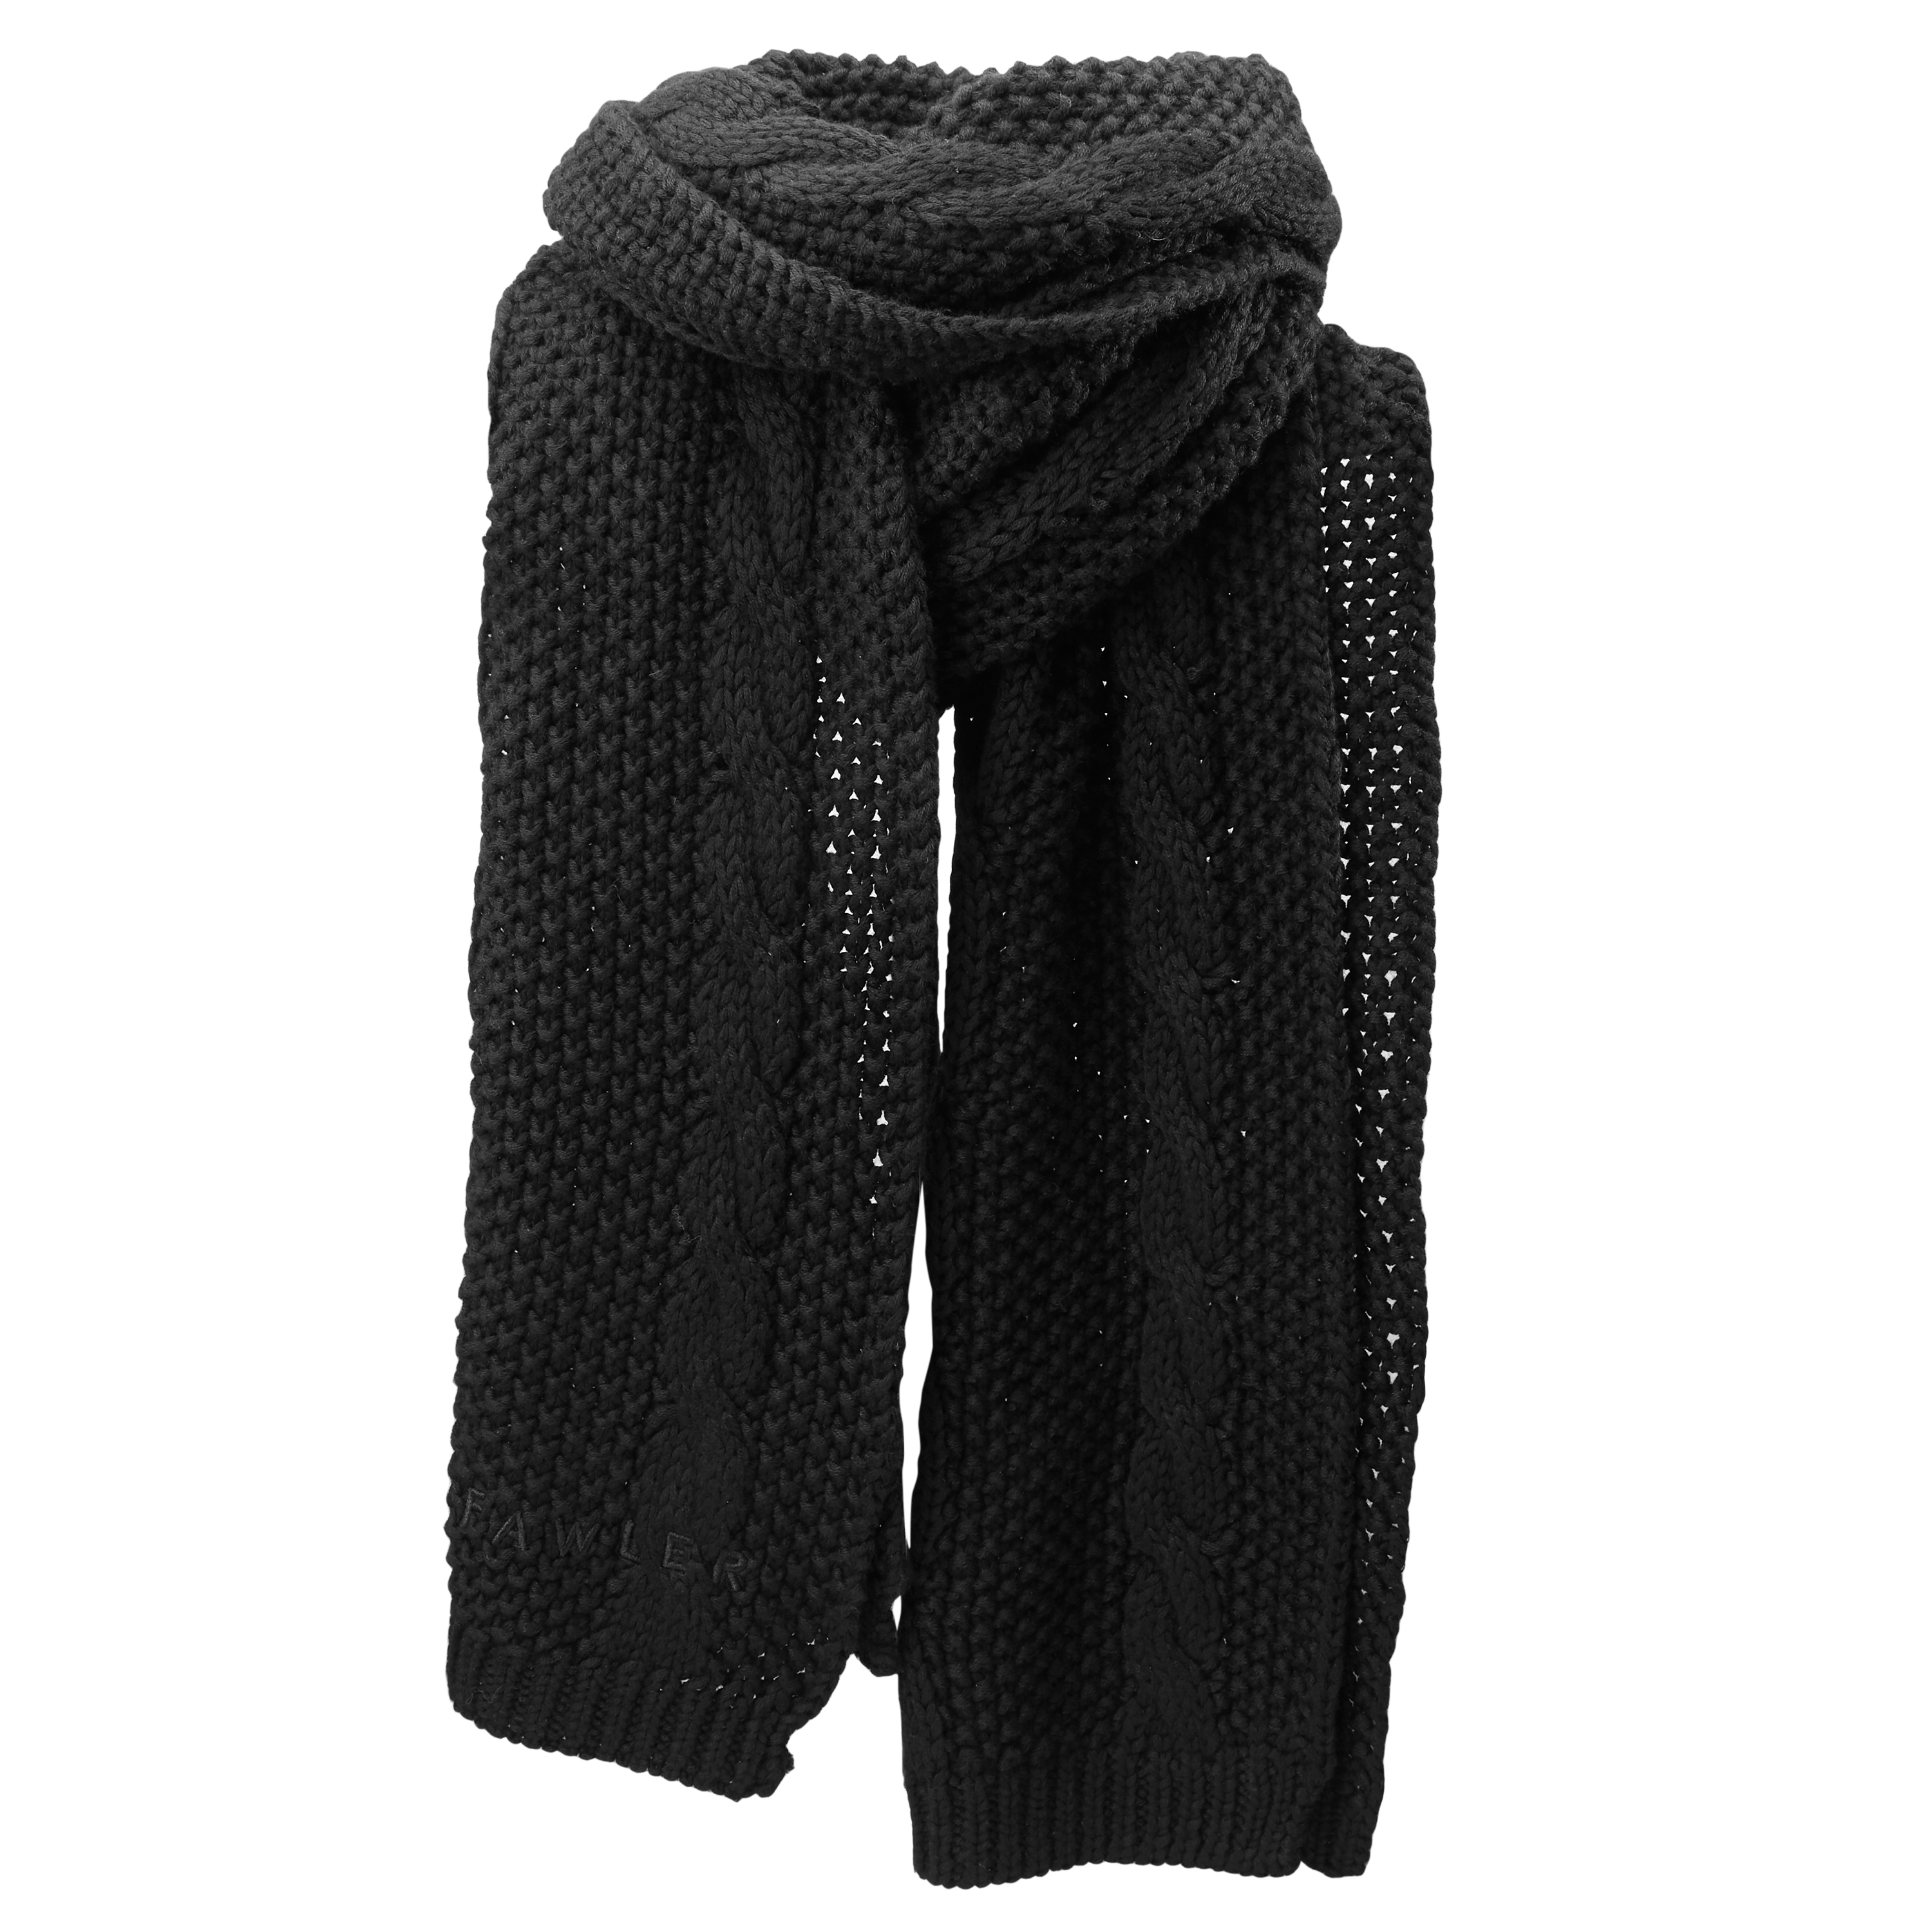 Oversized Black Knitted Scarf. Black Scarf. Hand Knitted Black 